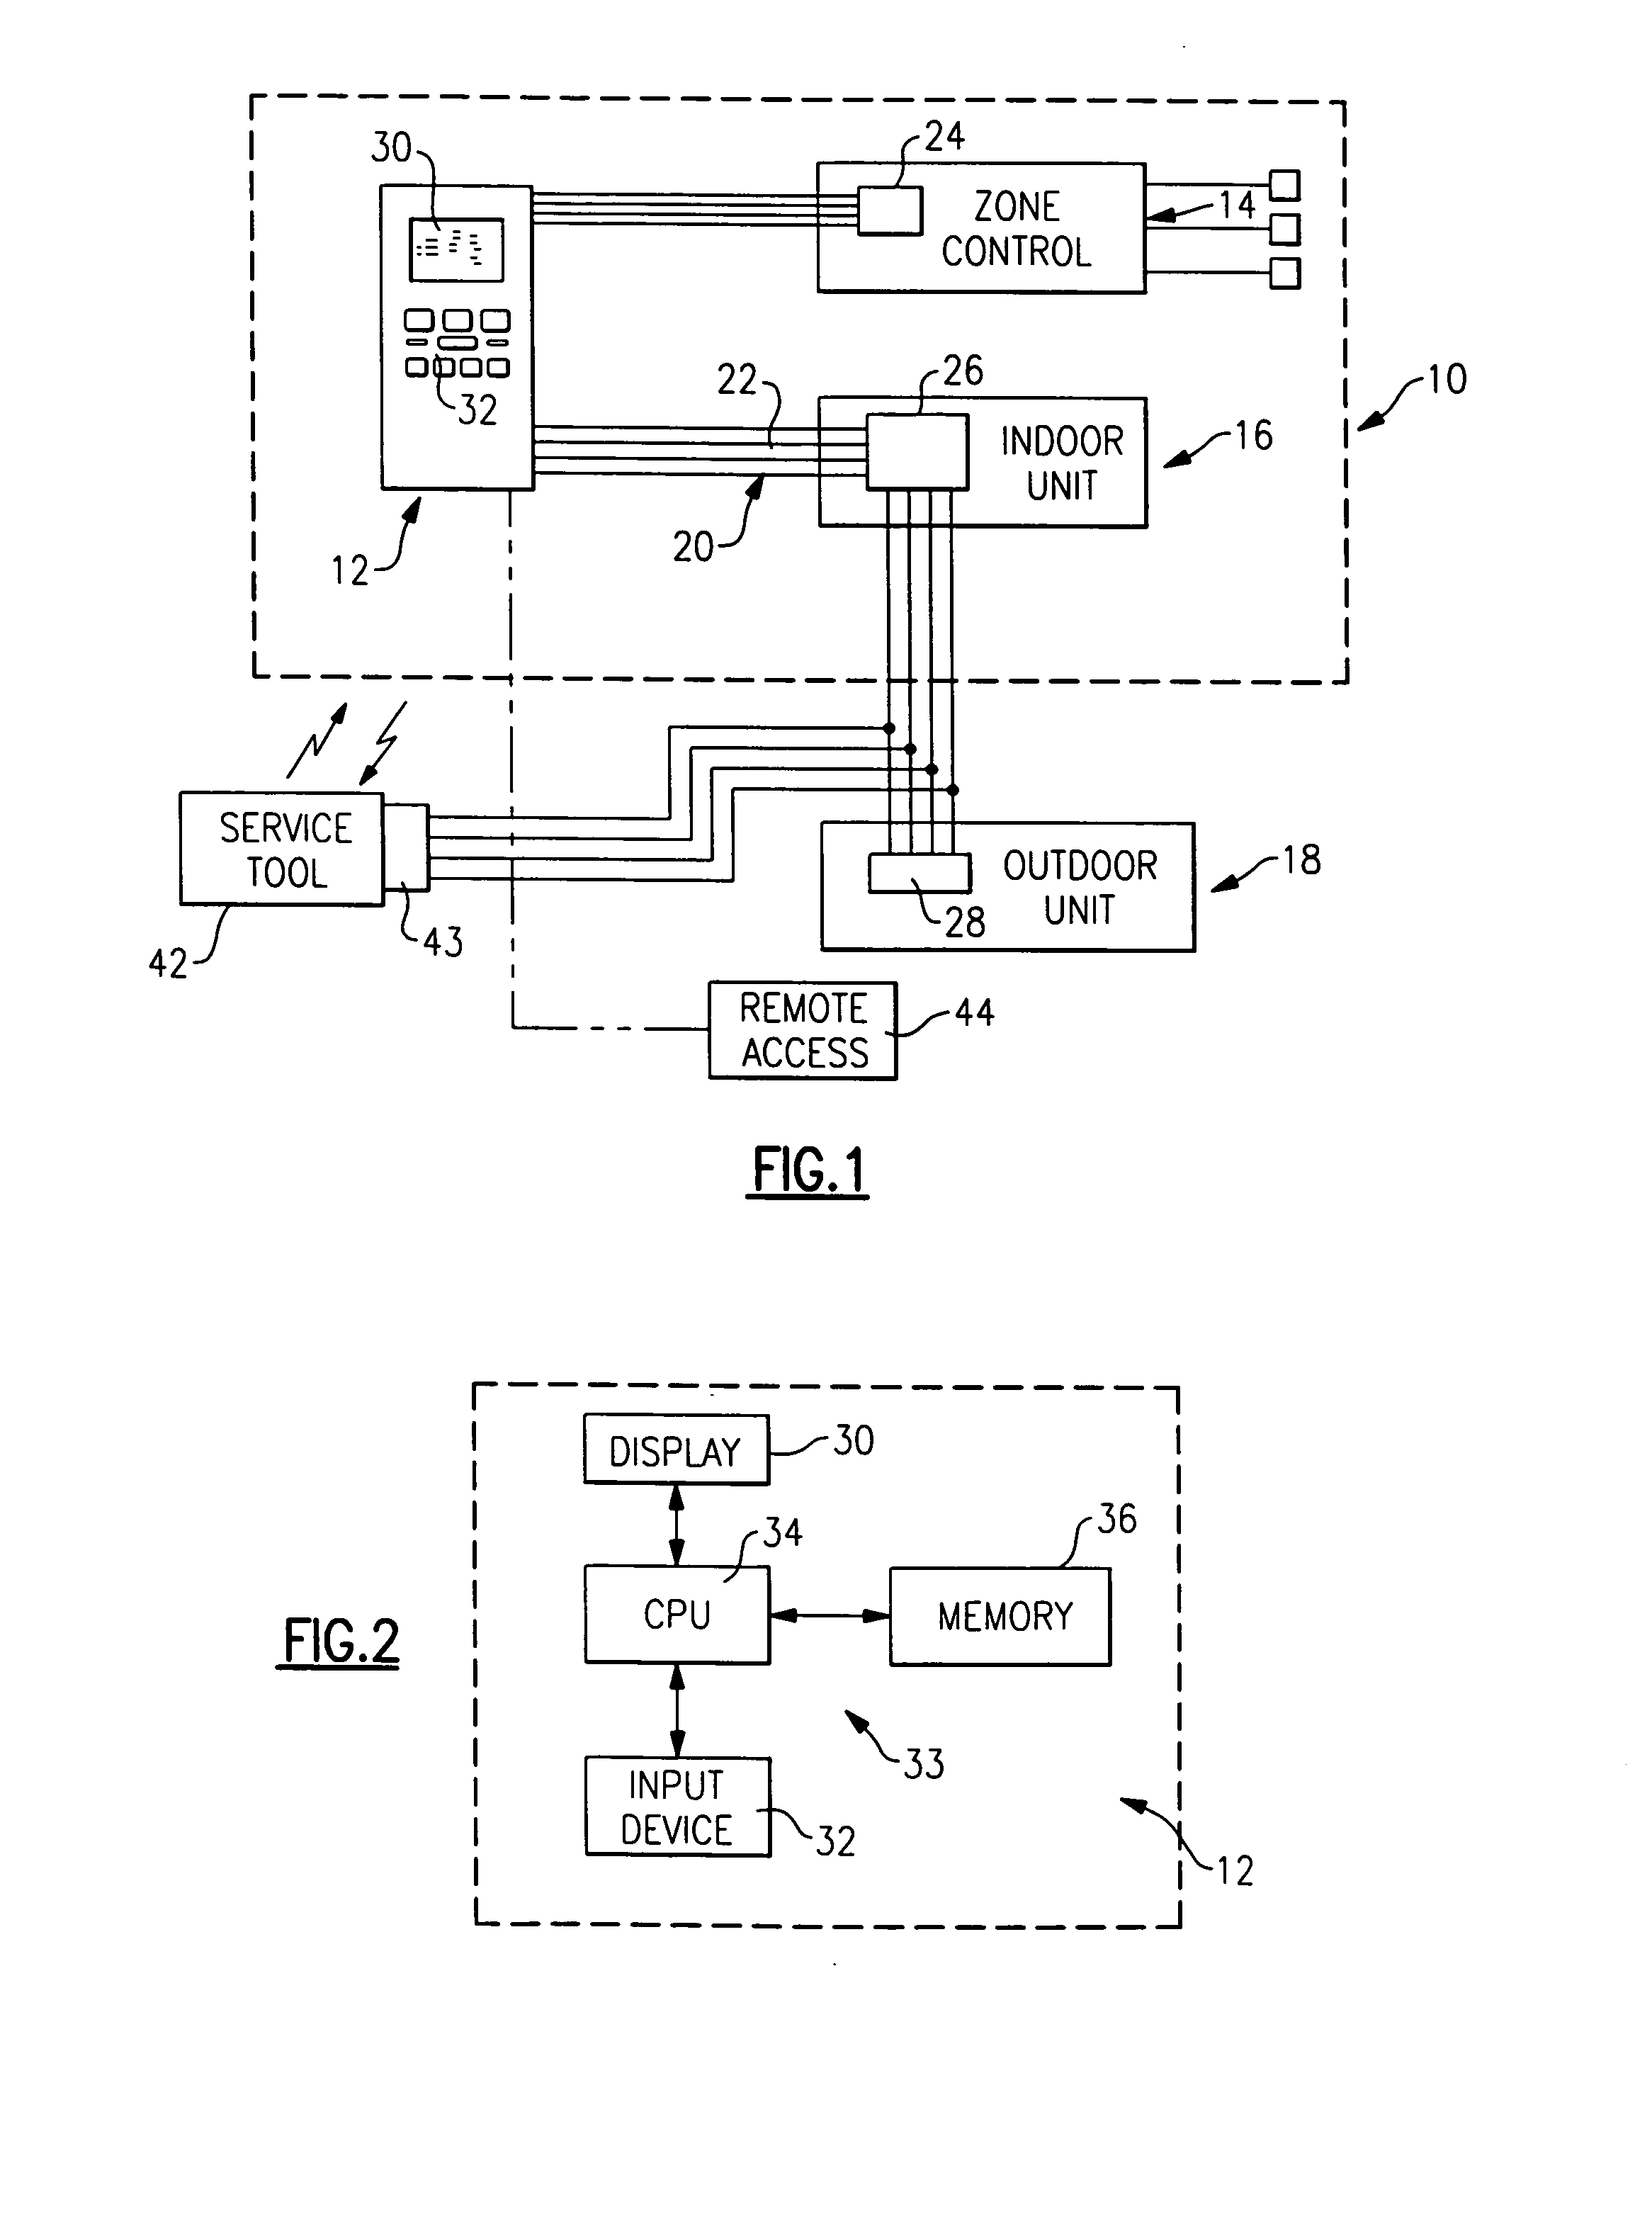 Ordered record of system-wide fault in an HVAC system